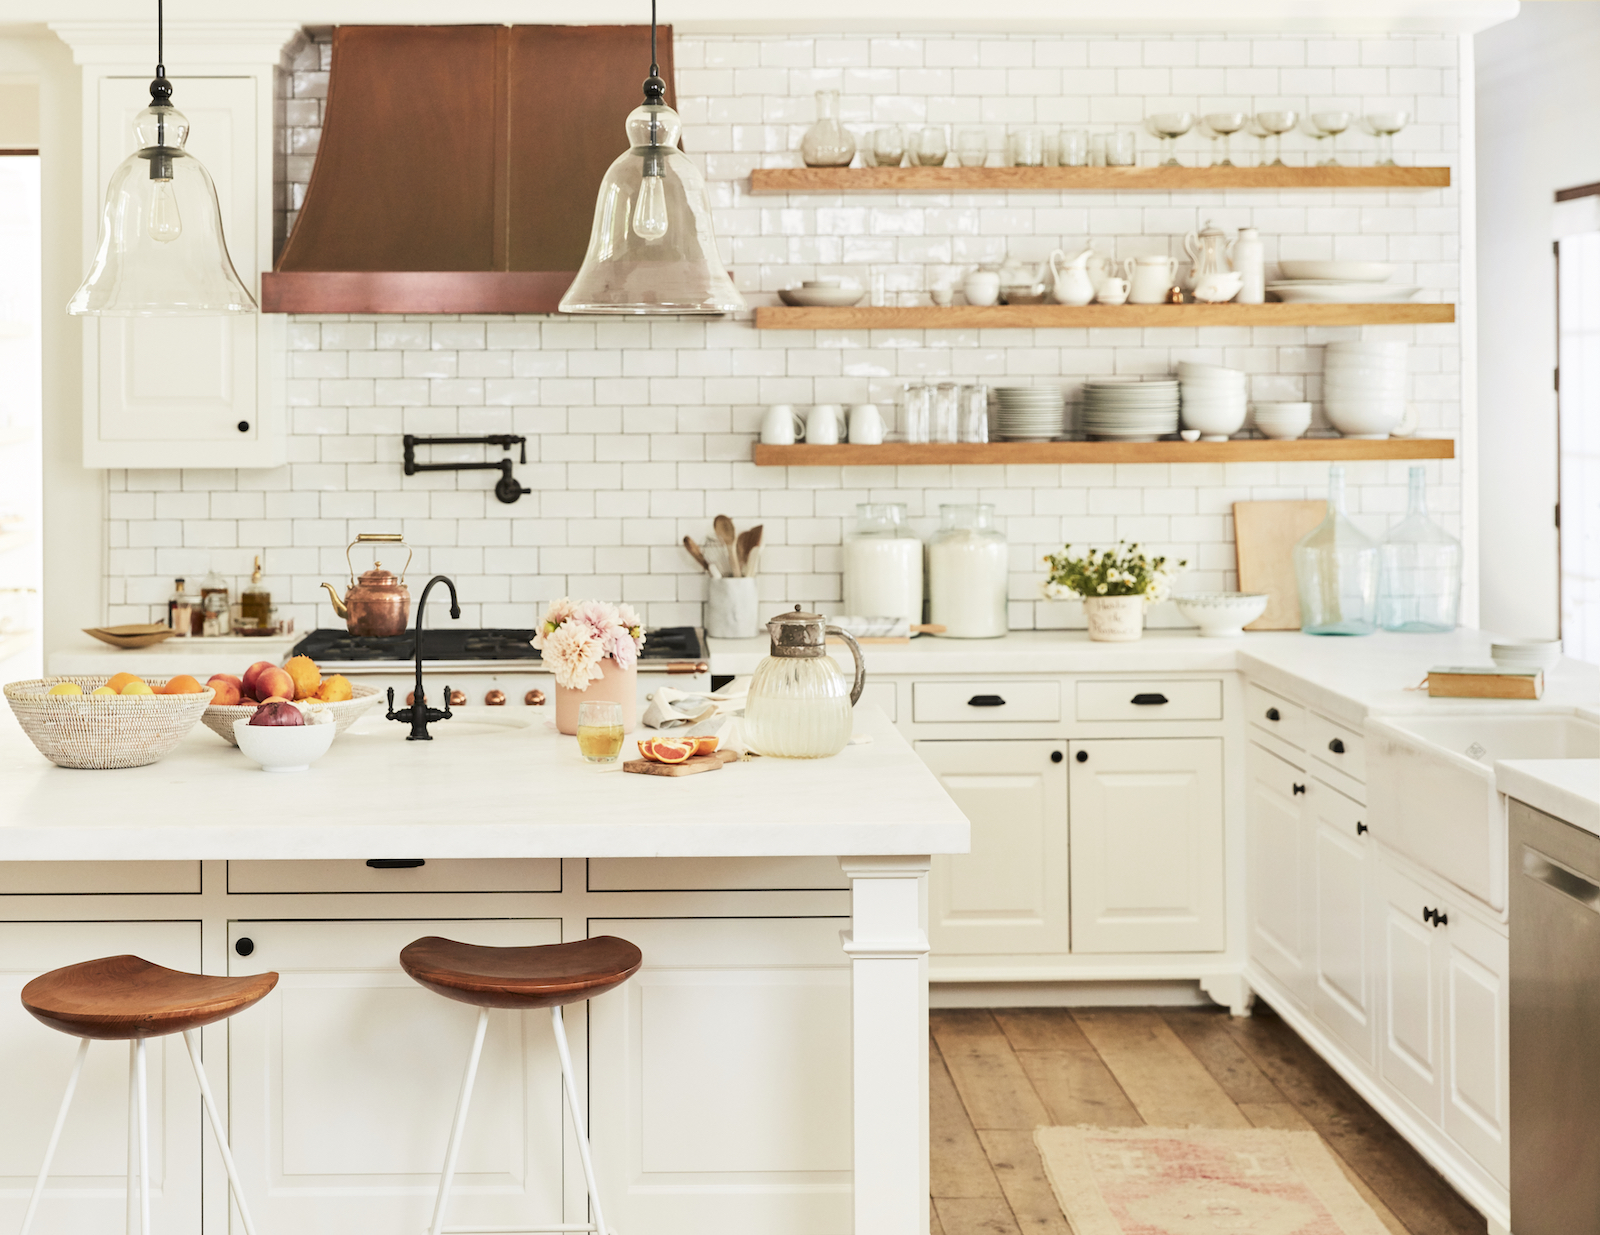 Emily Henderson’s Step-by-Step Guide To Remodeling Your Kitchen